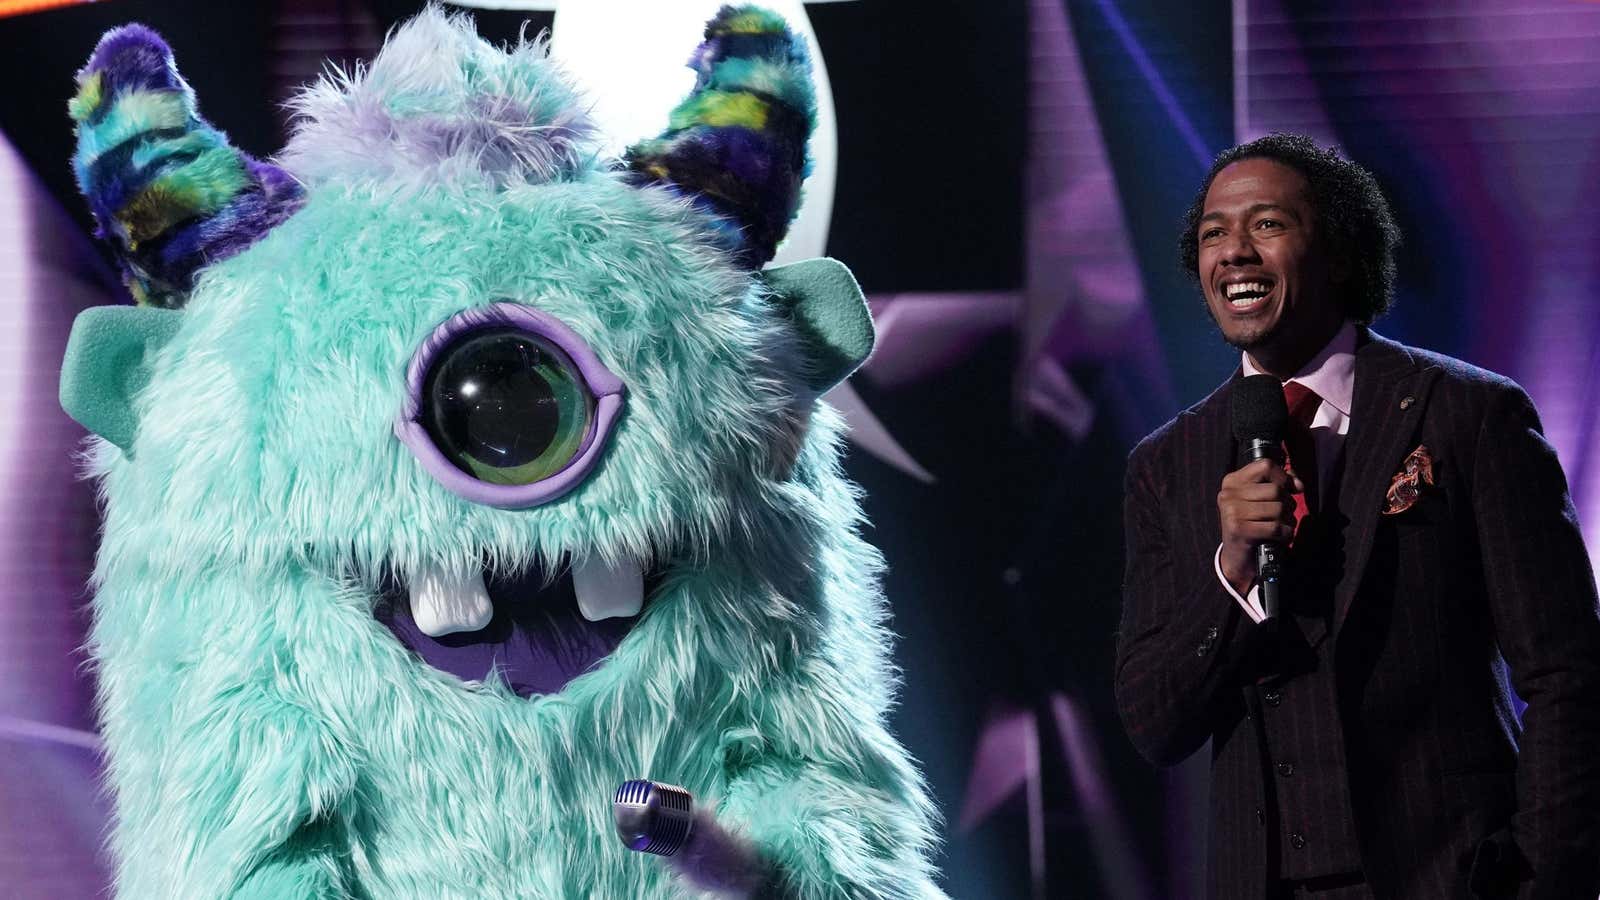 Host Nick Cannon standing next to the “monster.”